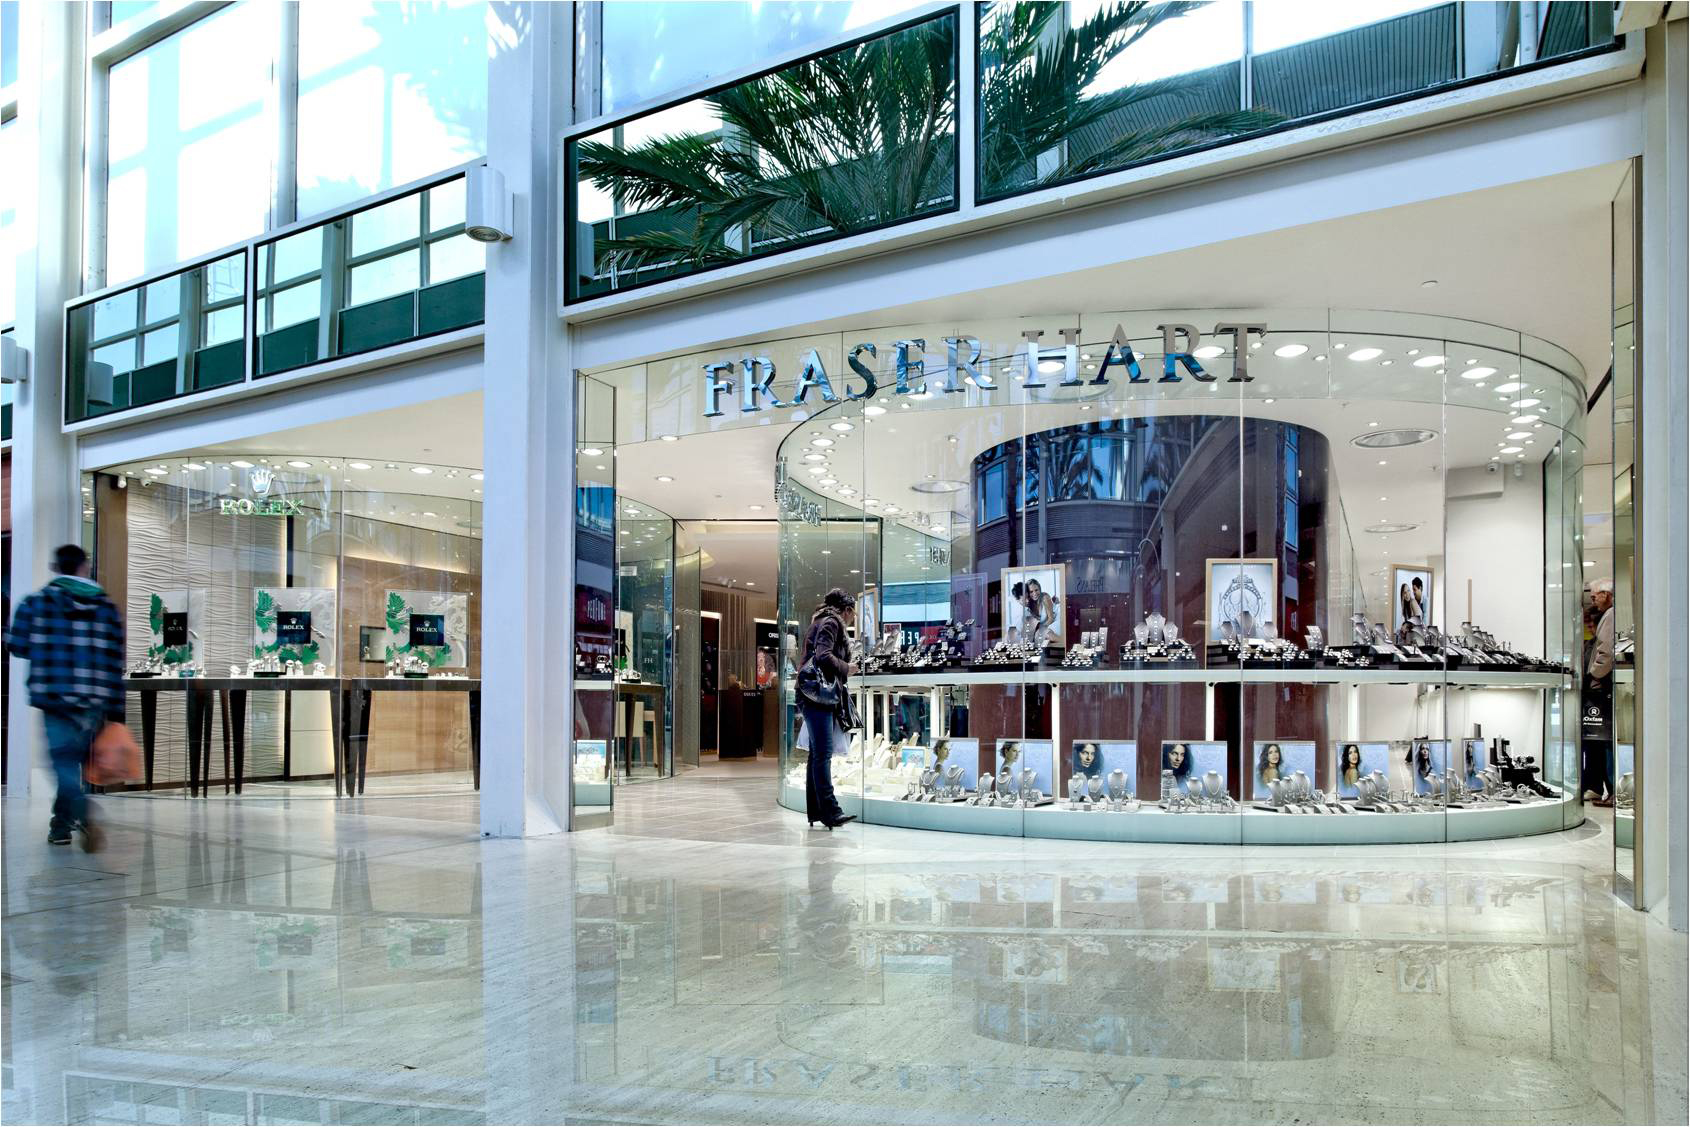 Fraser hart in milton keynes shows how new stores draw people deeper into the shop to see jewellery and watches.